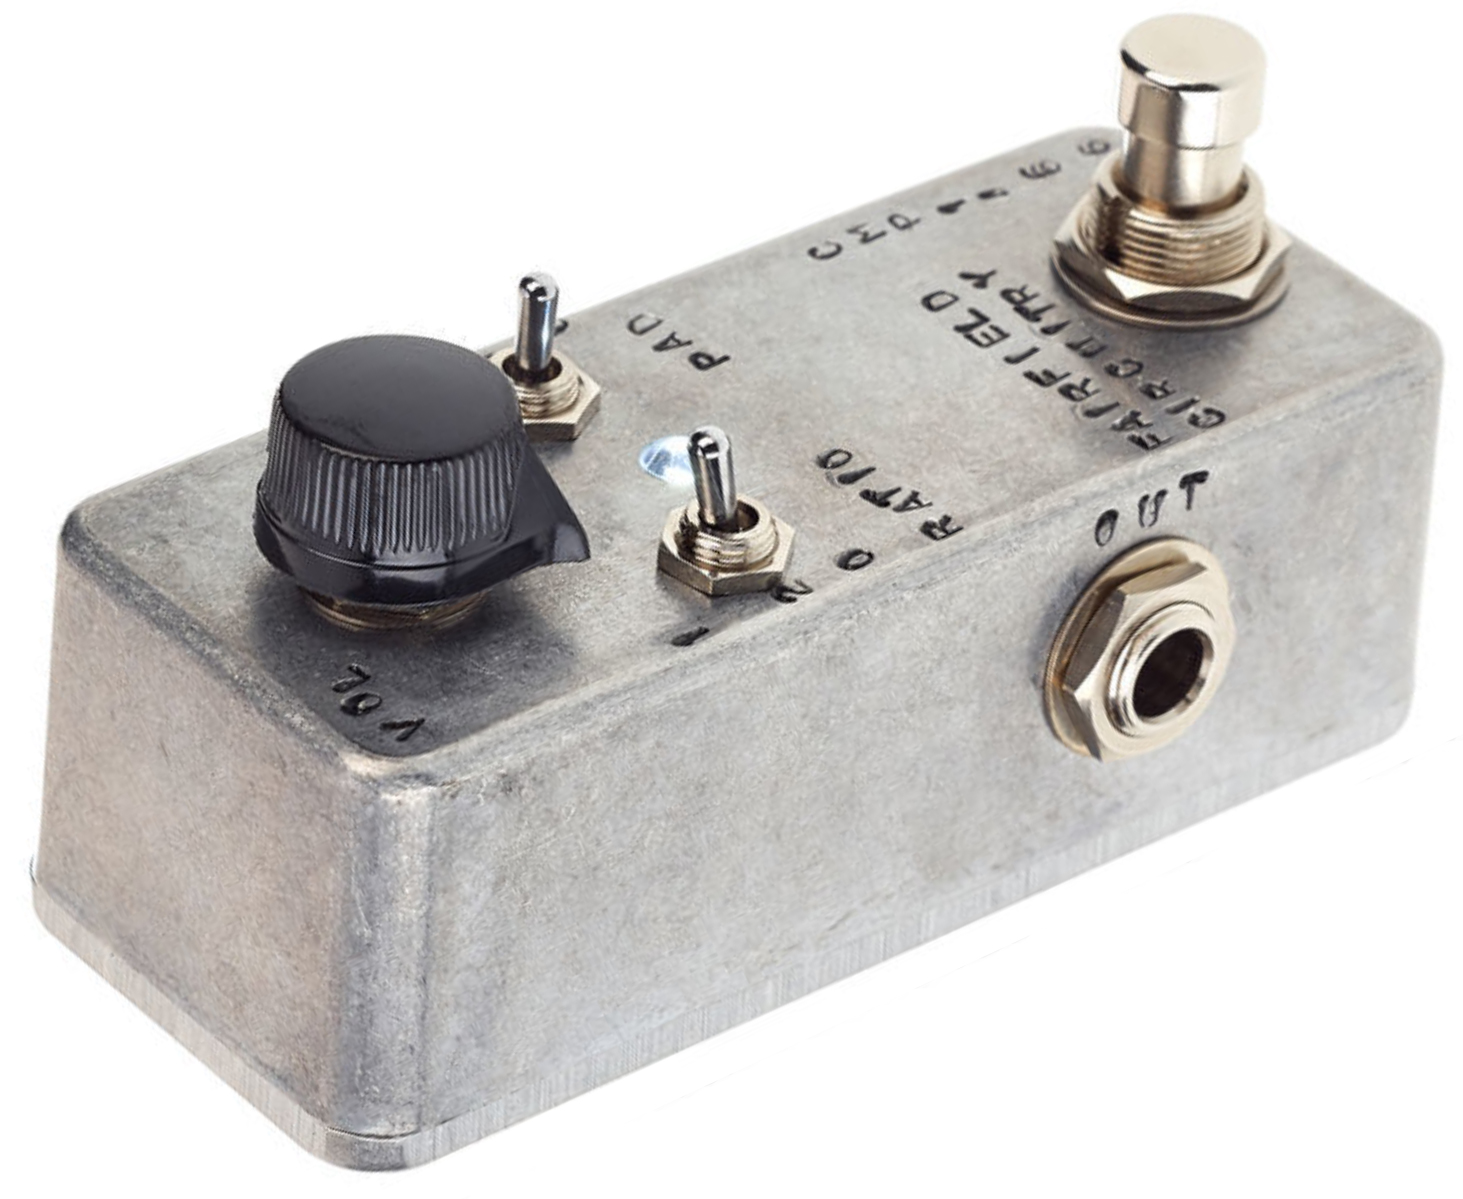 Fairfield Circuitry The Accountant Compressor - Compressor, sustain & noise gate effect pedal - Variation 2